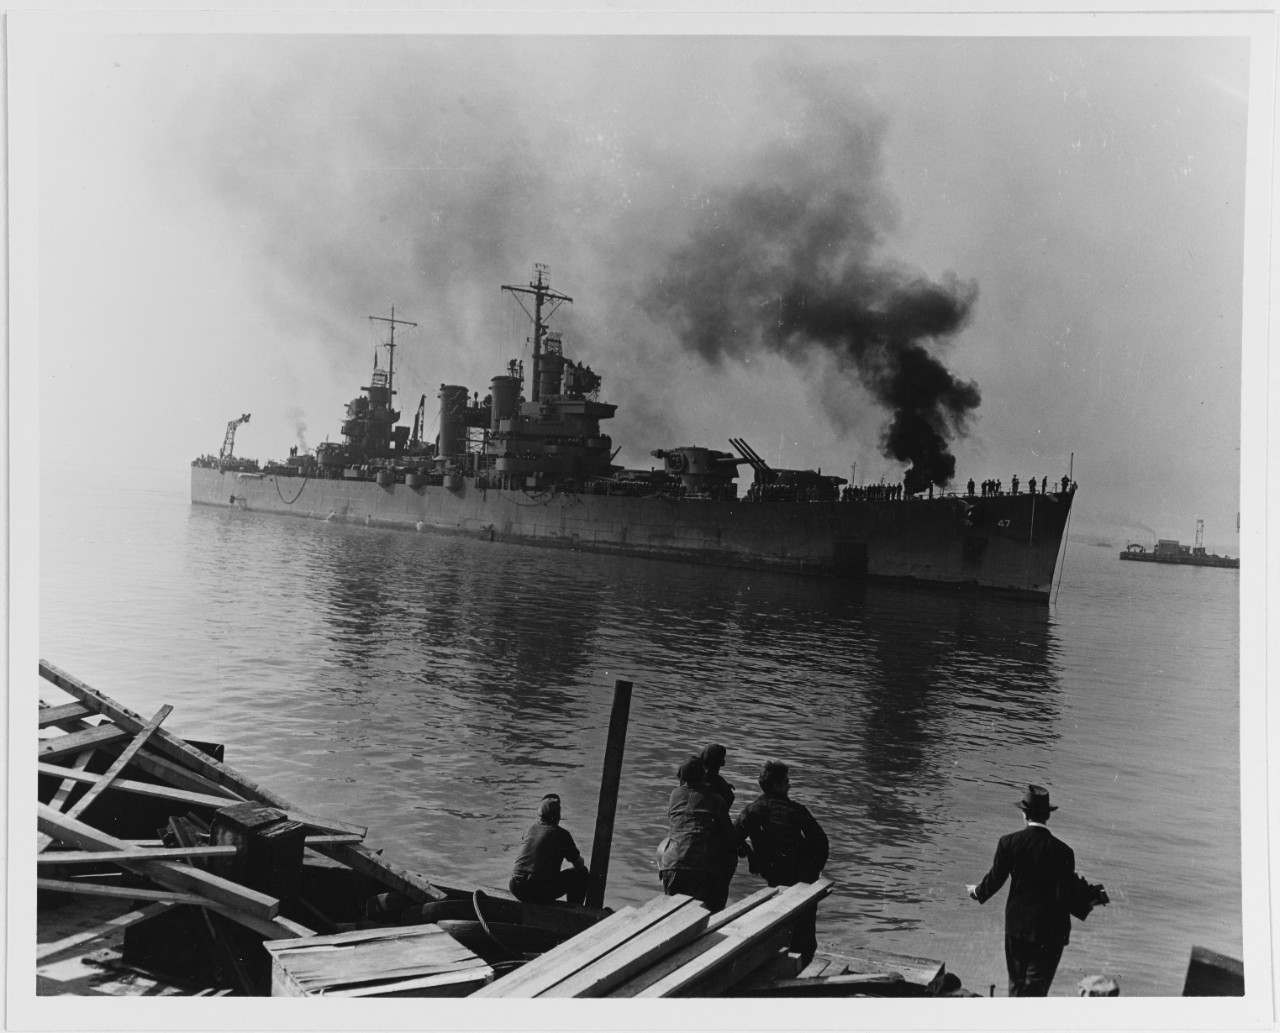 USS Boise (CL-47) arrives at the Philadelphia Navy Yard in November 1942 for repair of battle damage received during the 11-12 October Battle of Cape Esperance. Note the forward 6/47 triple gun turret trained to starboard. It was jammed in this position during the action, when a Japanese 8 shell hit the armored barbette just below the turret. Official U.S. Navy Photograph, now in the collections of the National Archives.